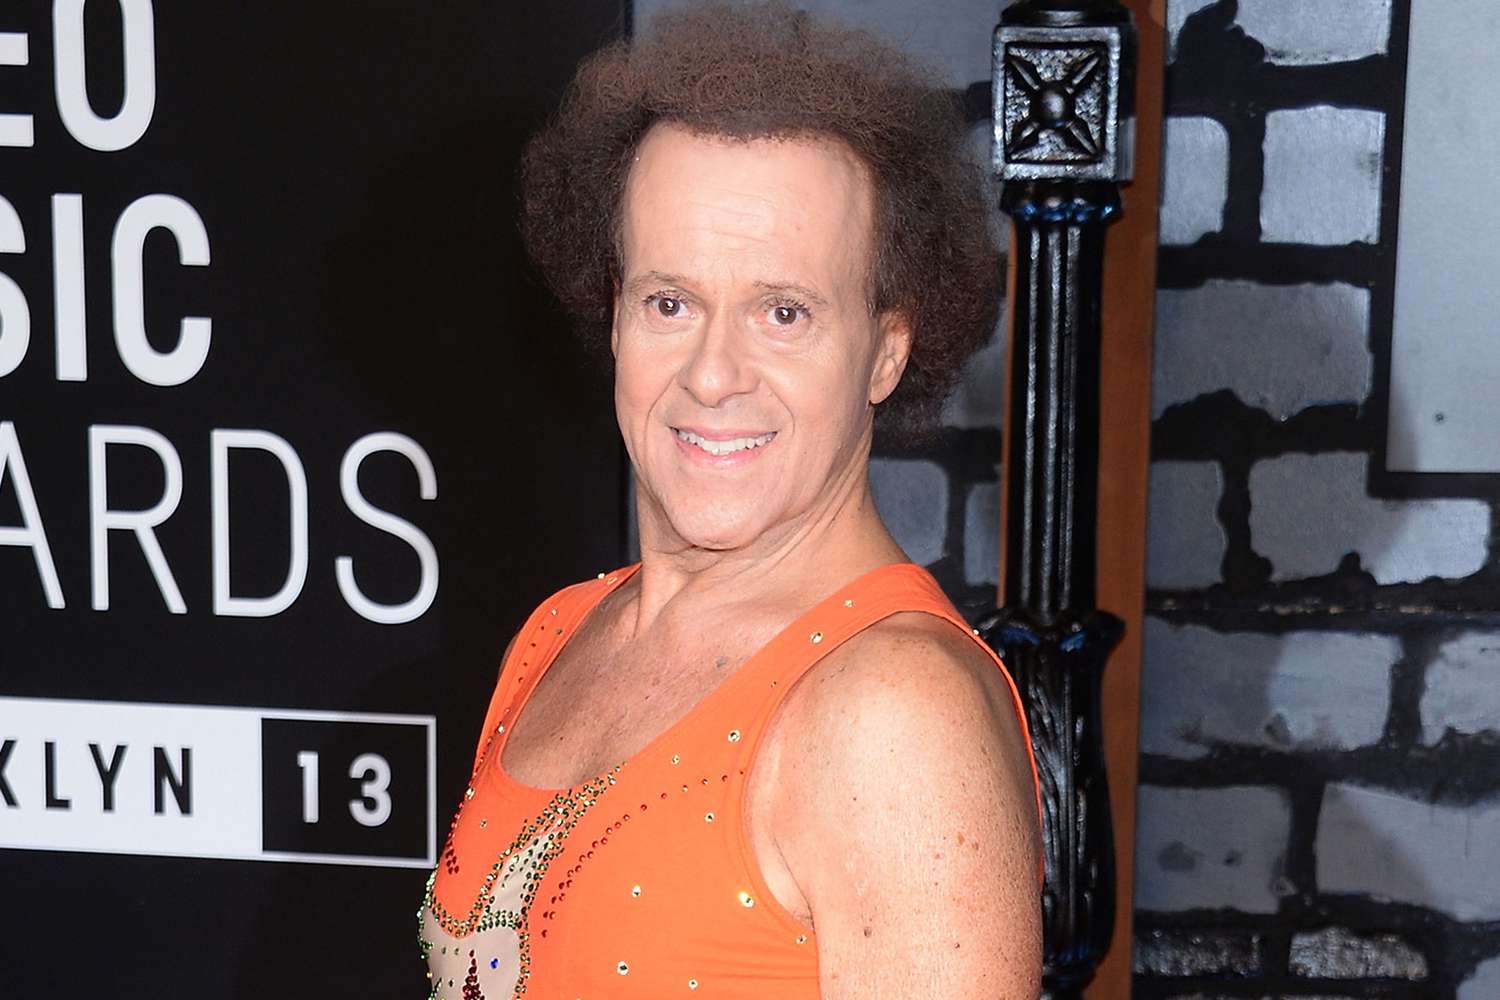 Richard Simmons Shares Uplifting Message About Overcoming Bullies